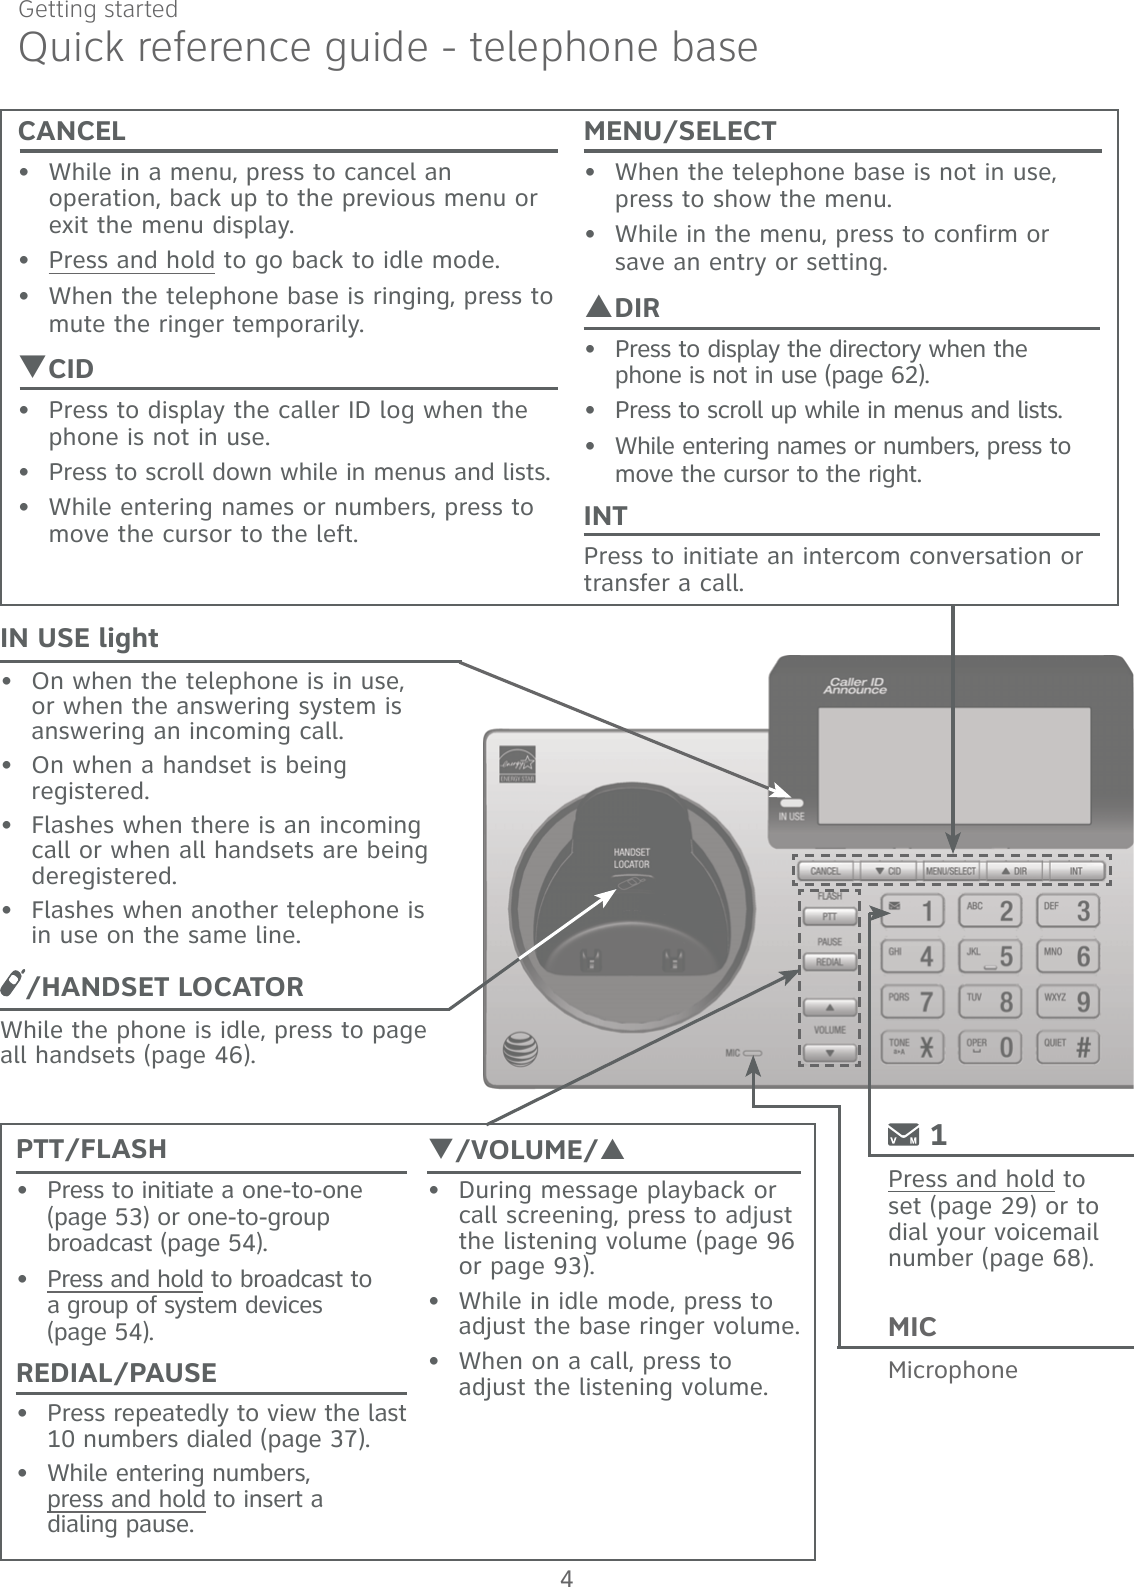 4Getting startedQuick reference guide - telephone baseIN USE lightOn when the telephone is in use, or when the answering system is answering an incoming call.On when a handset is being registered.Flashes when there is an incoming call or when all handsets are being deregistered. Flashes when another telephone is in use on the same line.••••PTT/FLASHPress to initiate a one-to-one (page 53) or one-to-group broadcast (page 54).Press and hold to broadcast to  a group of system devices  (page 54).REDIAL/PAUSEPress repeatedly to view the last 10 numbers dialed (page 37).While entering numbers,  press and hold to insert a  dialing pause.••••/HANDSET LOCATORWhile the phone is idle, press to page all handsets (page 46).T/VOLUME/SDuring message playback or call screening, press to adjust the listening volume (page 96 or page 93).While in idle mode, press to adjust the base ringer volume.When on a call, press to adjust the listening volume.•••MICMicrophone 1Press and hold to set (page 29) or to dial your voicemail number (page 68).MENU/SELECTWhen the telephone base is not in use, press to show the menu. While in the menu, press to confirm or save an entry or setting. SDIRPress to display the directory when the phone is not in use (page 62). Press to scroll up while in menus and lists. While entering names or numbers, press to move the cursor to the right.INTPress to initiate an intercom conversation or transfer a call.•••••CANCELWhile in a menu, press to cancel an operation, back up to the previous menu or exit the menu display.Press and hold to go back to idle mode.When the telephone base is ringing, press to mute the ringer temporarily.TCIDPress to display the caller ID log when the phone is not in use.Press to scroll down while in menus and lists.While entering names or numbers, press to move the cursor to the left.••••••